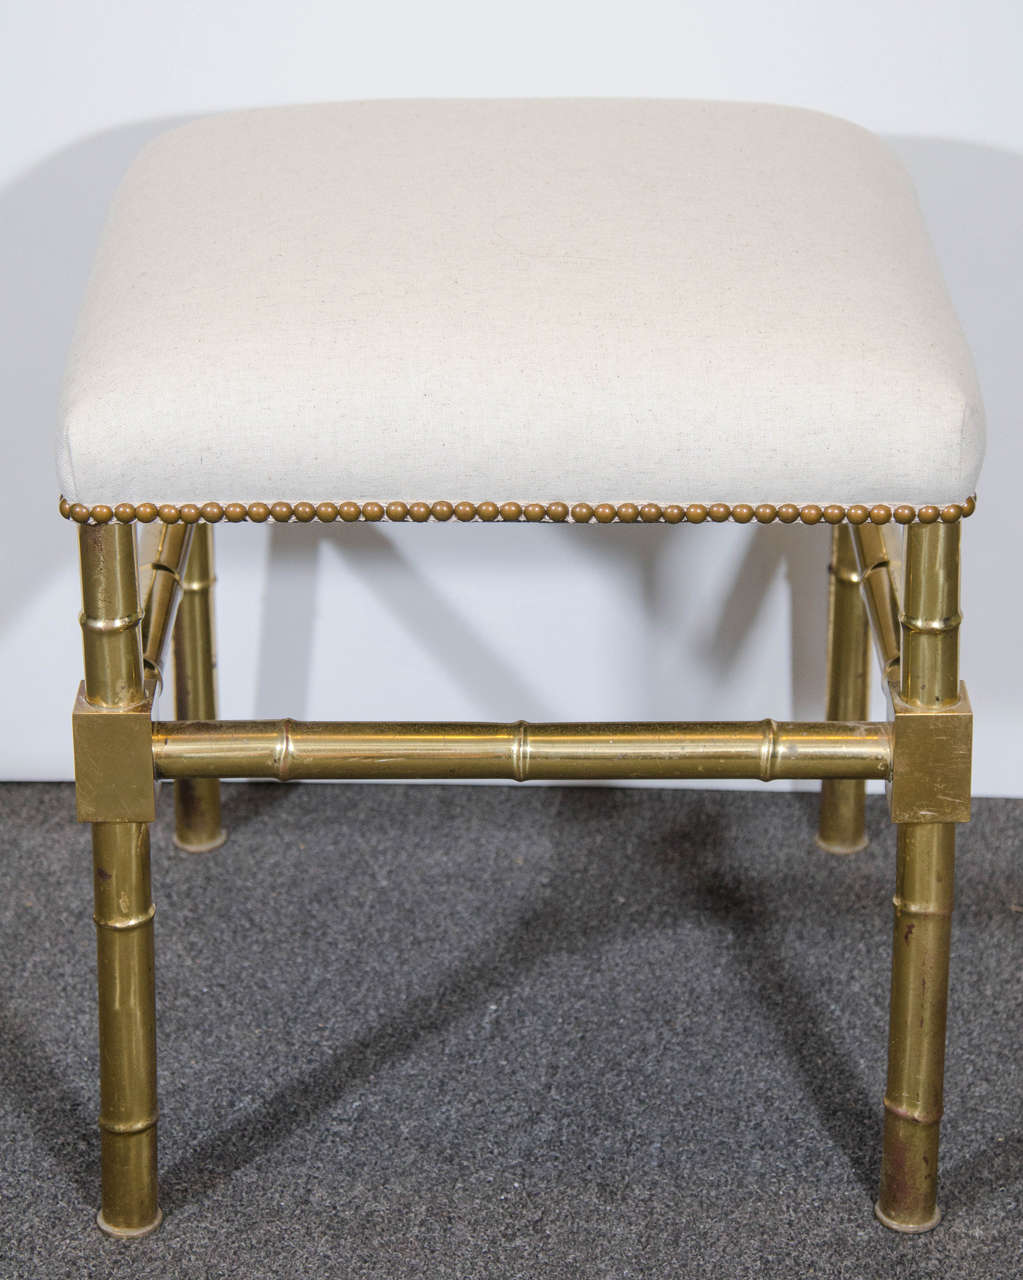 A vintage pair of Italian brass faux bamboo stools or ottomans newly upholstered in a sand colored linen with nail head detailing. Marked, 